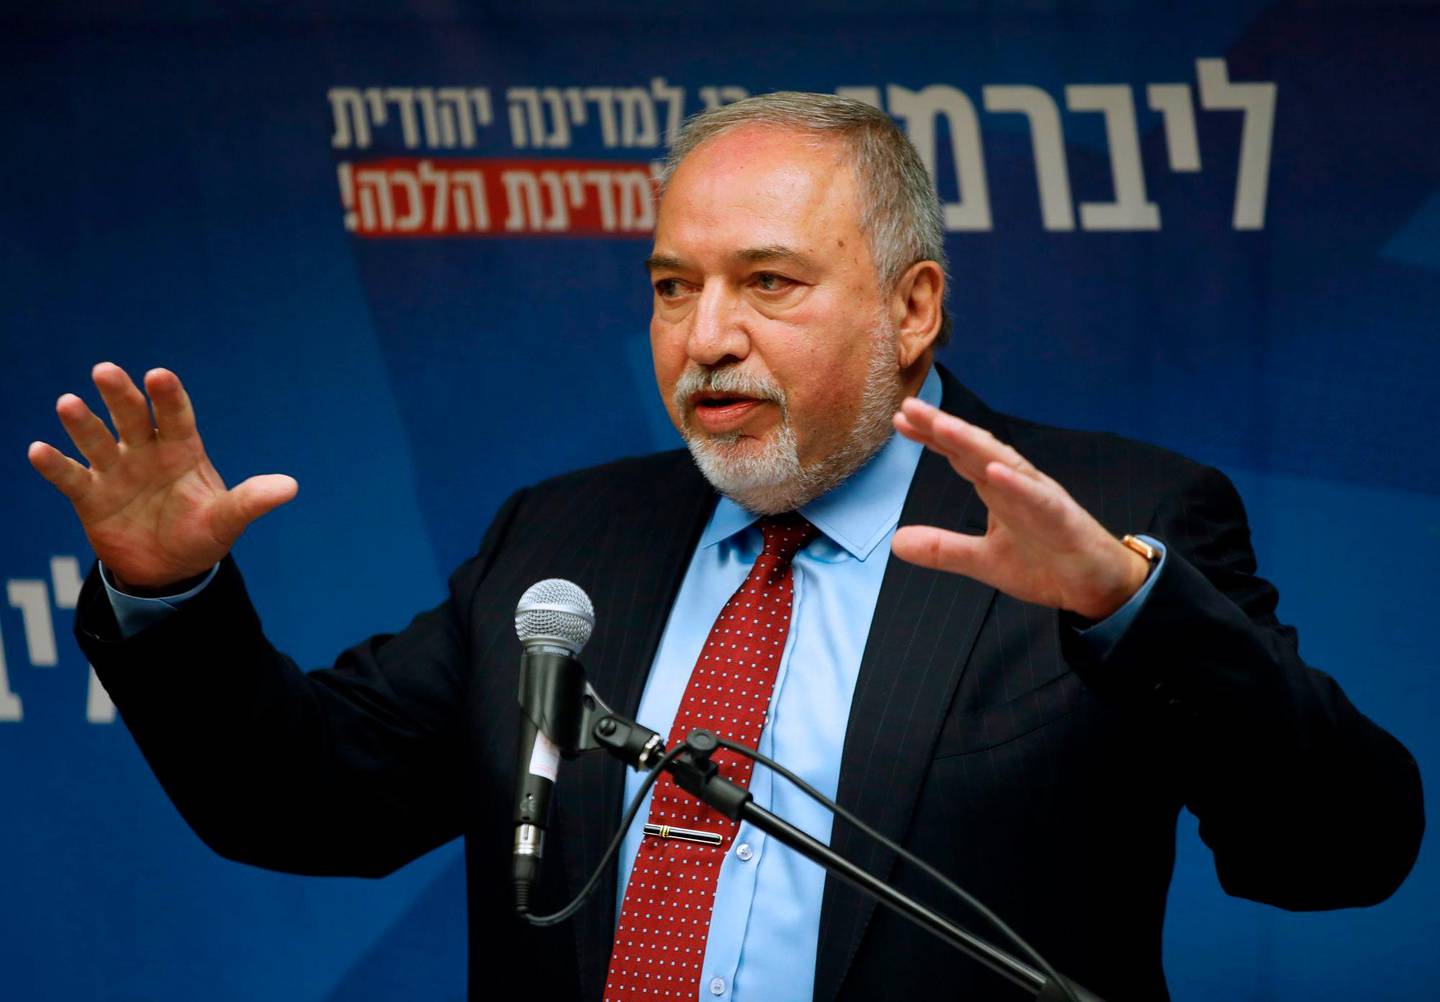 Yisrael Beitenu's party head Avigdor Lieberman delivers a statement to the press on December 11, 2019 in Jerusalem. - Israeli lawmakers gave initial approval today to a bill that would dissolve parliament and set the third general election in a year for the beginning of March. The bill, which passed the preliminary vote 50-0, comes ahead of a midnight (2200 GMT) deadline to form a new coalition, and would set the date for polls as March 2 next year. It faces two more plenary votes before being passed. (Photo by Menahem KAHANA / AFP)